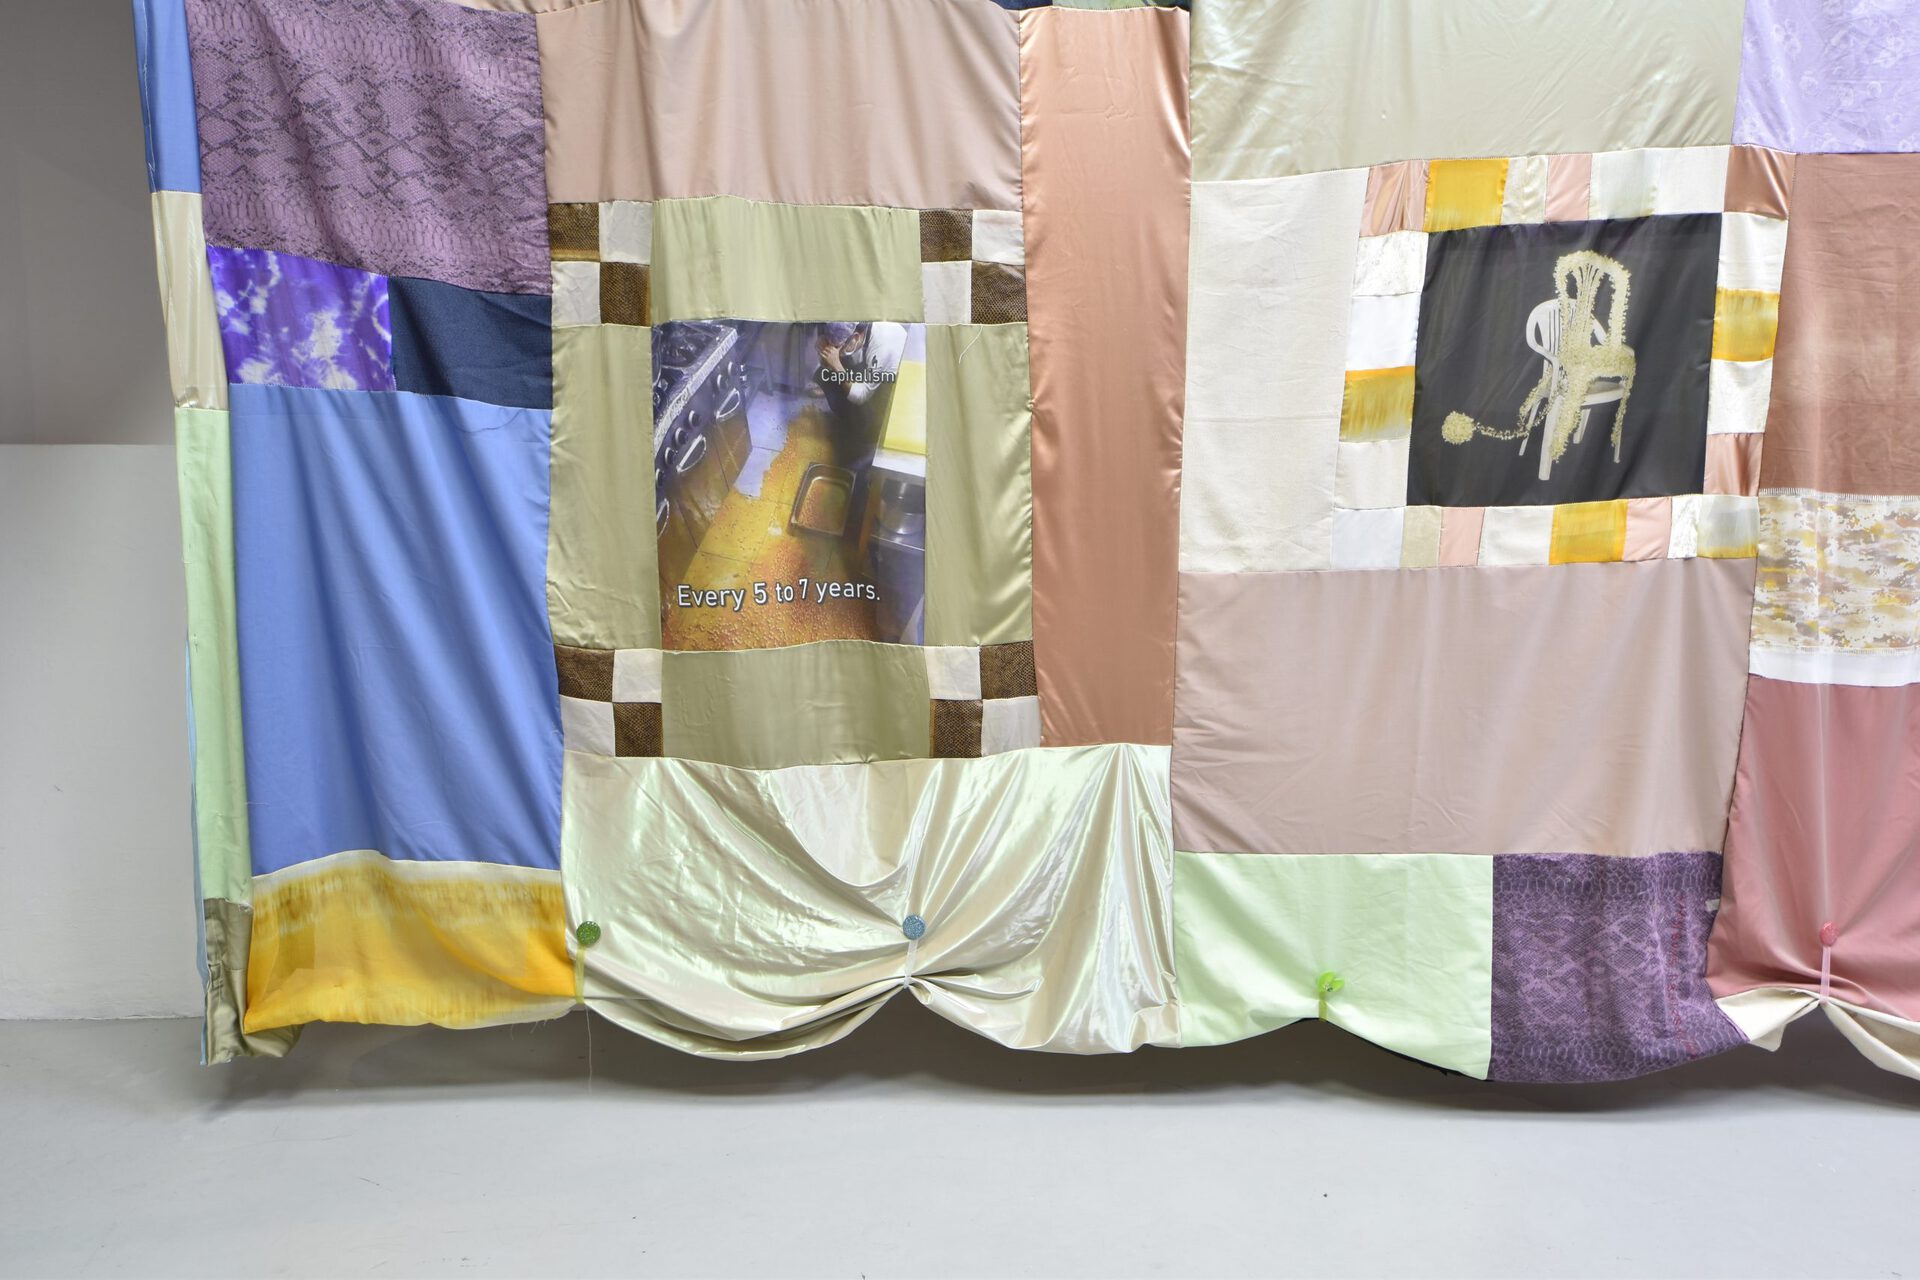 Viola Morini x Giacomo Giannantonio, "No child left behind" (detail), 2021, site-specific installation with various fabrics, variable dimensions